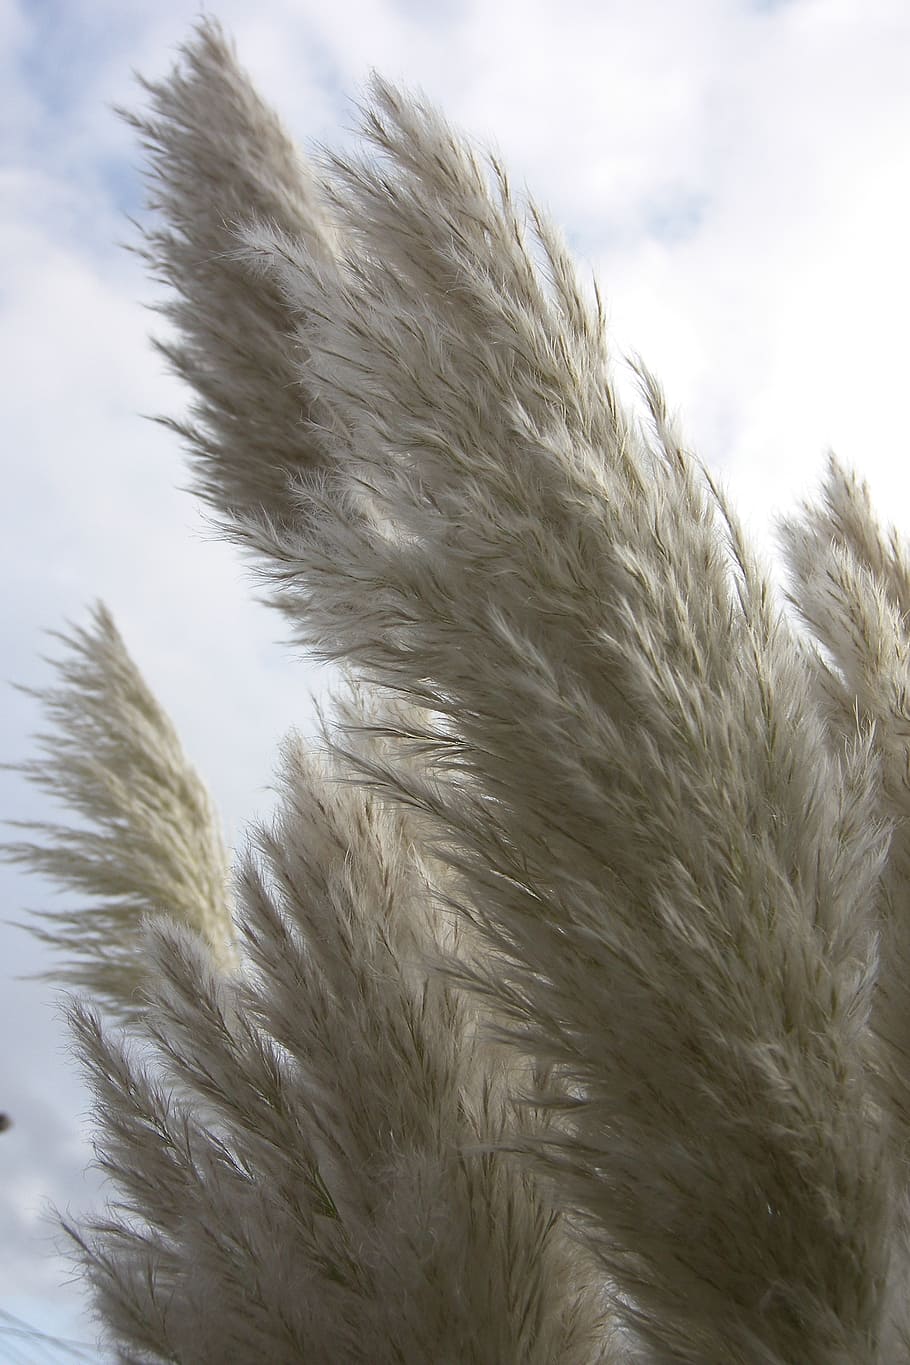 pampas, garden, white, plumes, nature, feather duster, plants, close-up, plant, sky